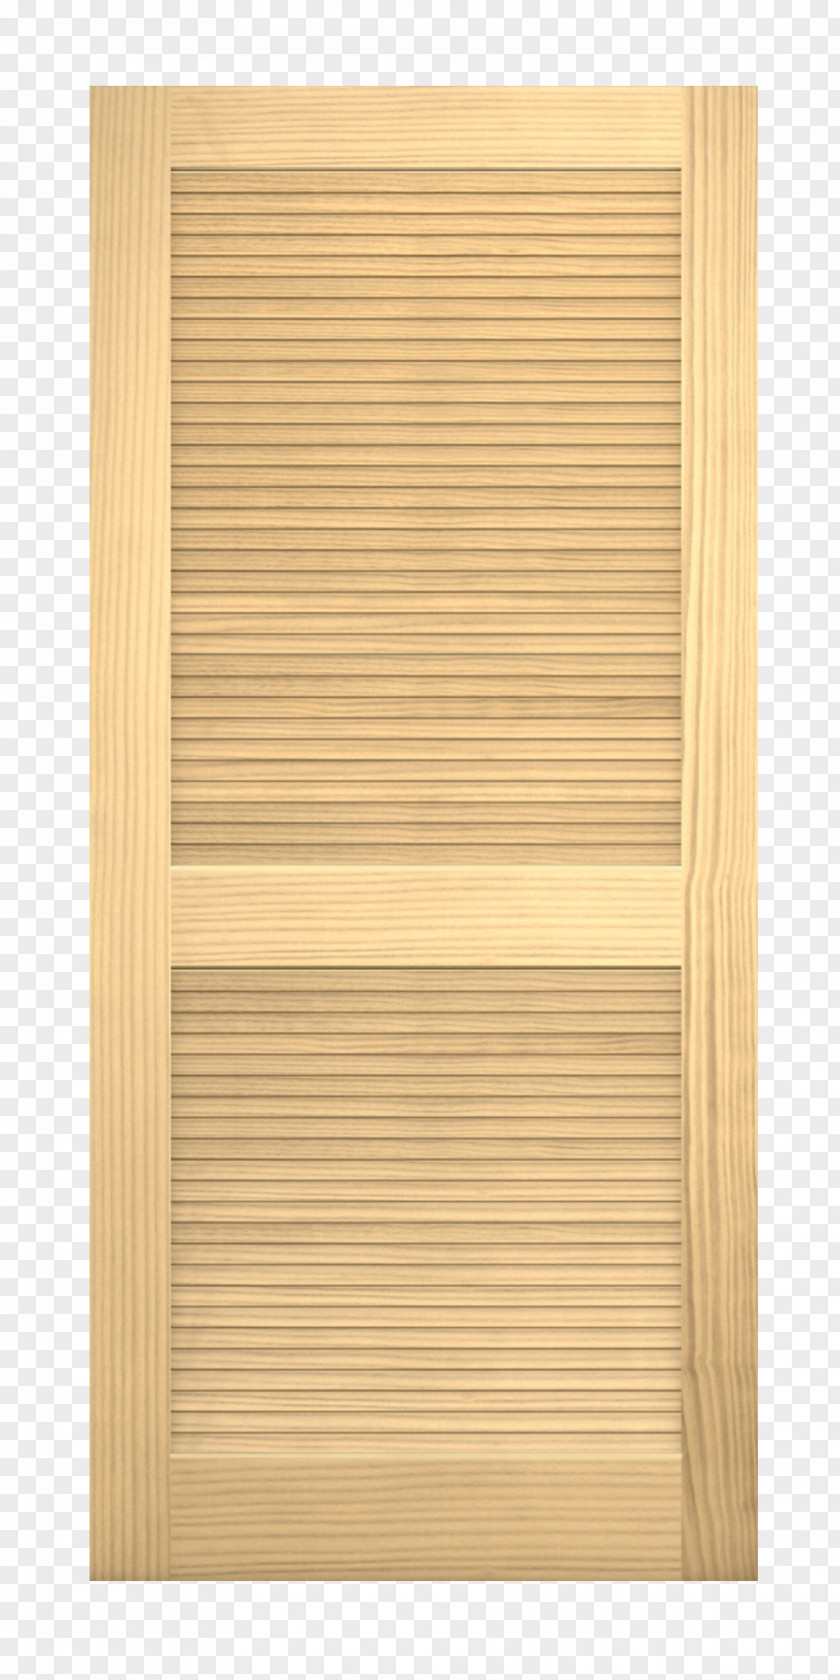 Solid Wood Doors And Windows Plywood Stain Varnish Hardwood Angle PNG